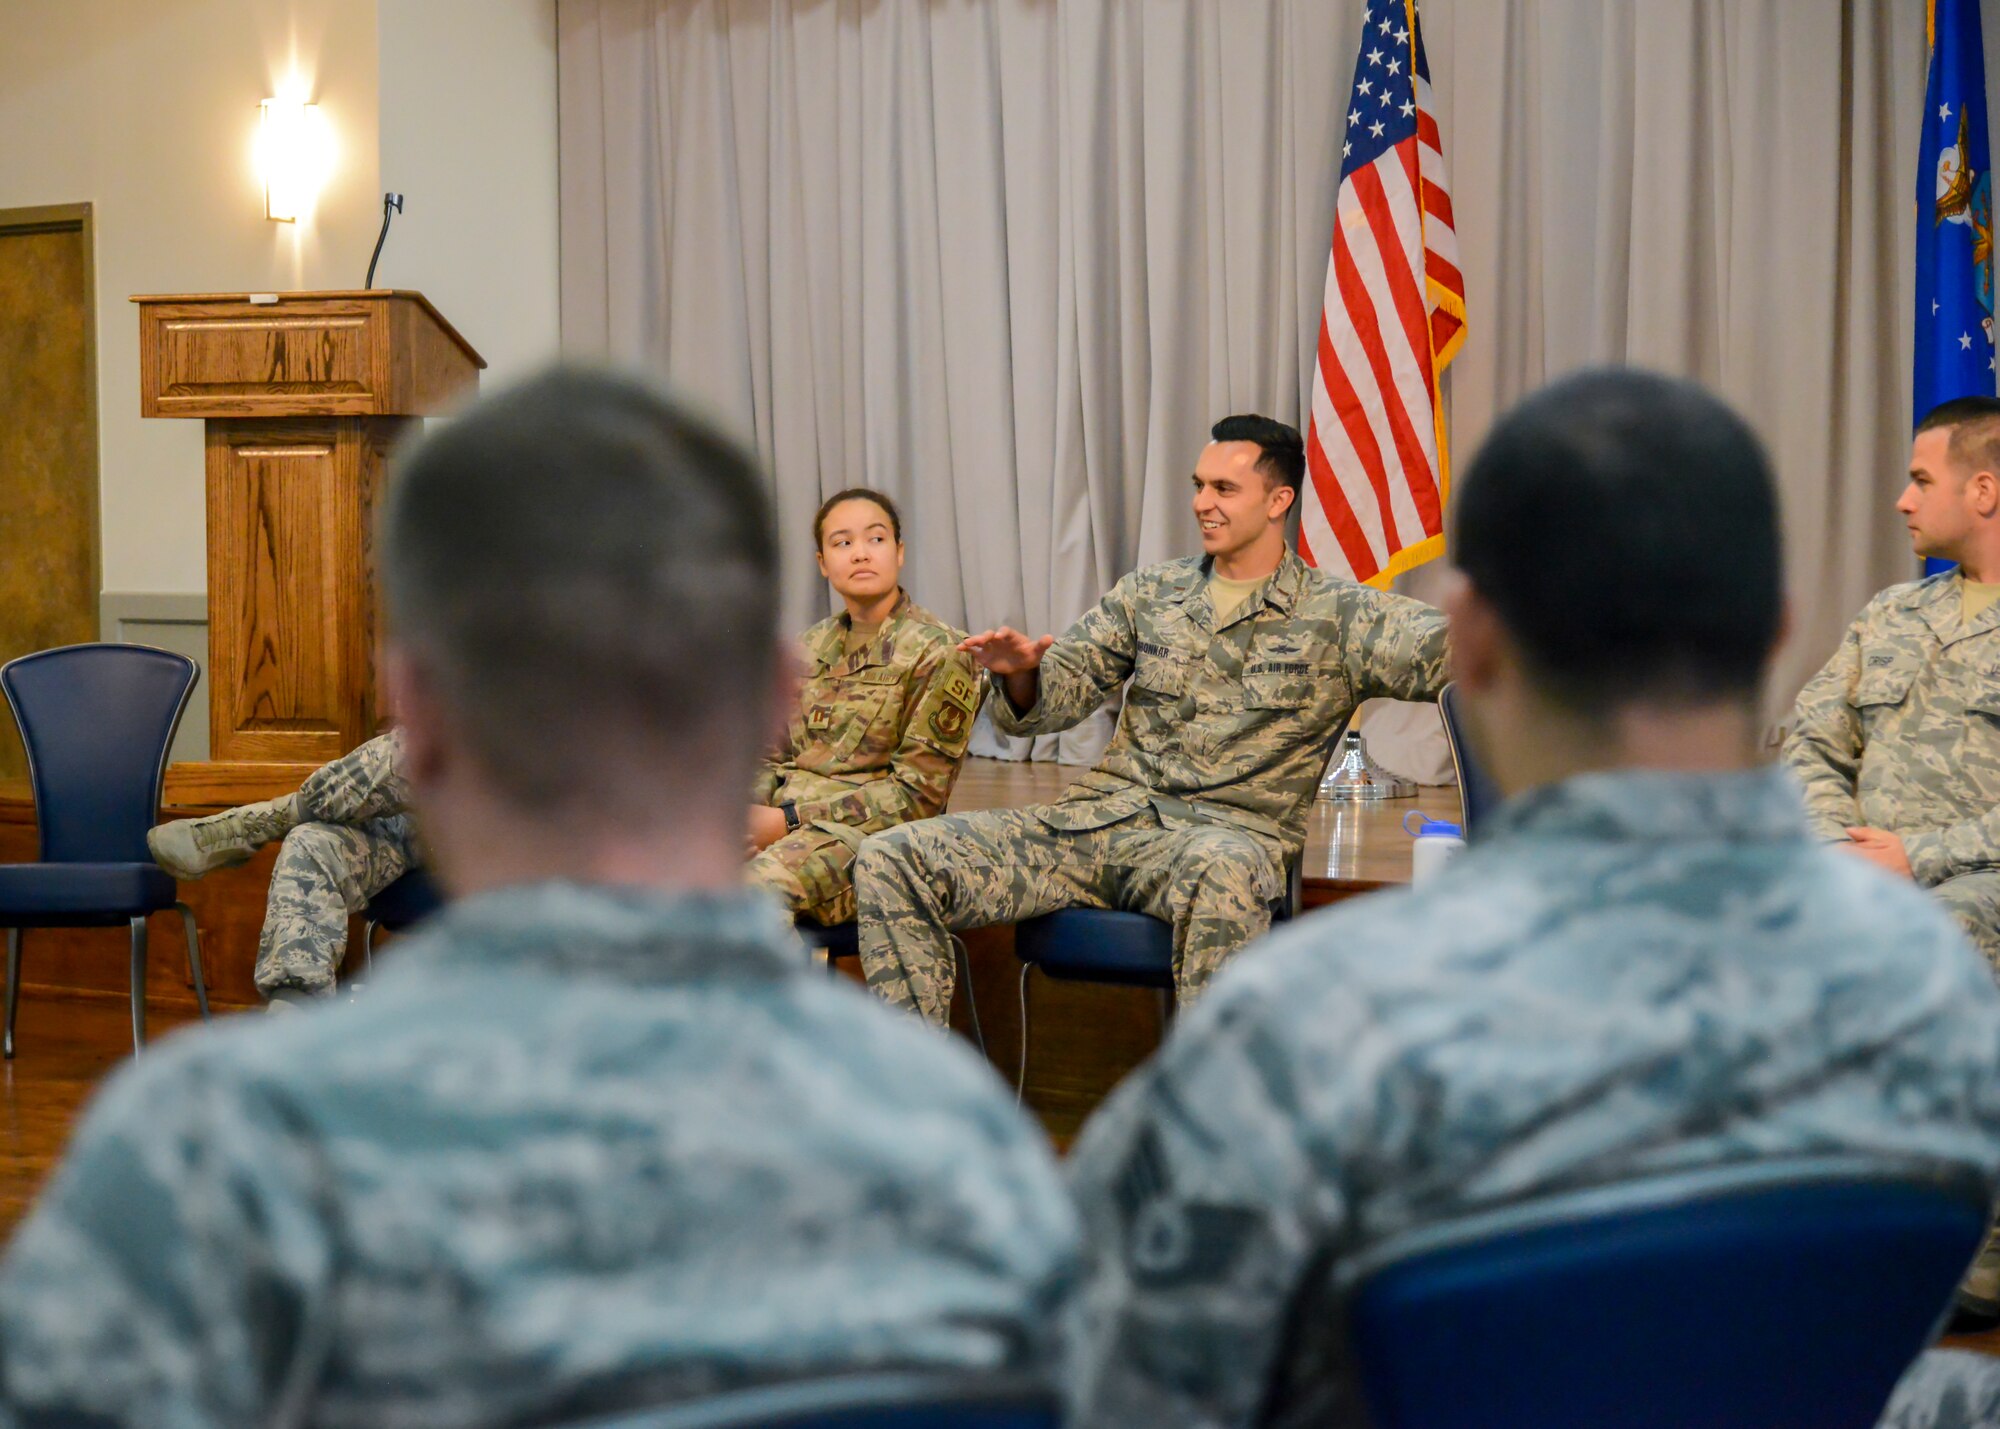 2nd Lt. Cody Bronkar, 412th Communications Squadron, participates in a discussion with a group of technical sergeants during a two-day professional development seminar at Edwards Air Force Base, Calif. July 18. (U.S. Air Force photo by Giancarlo Casem)